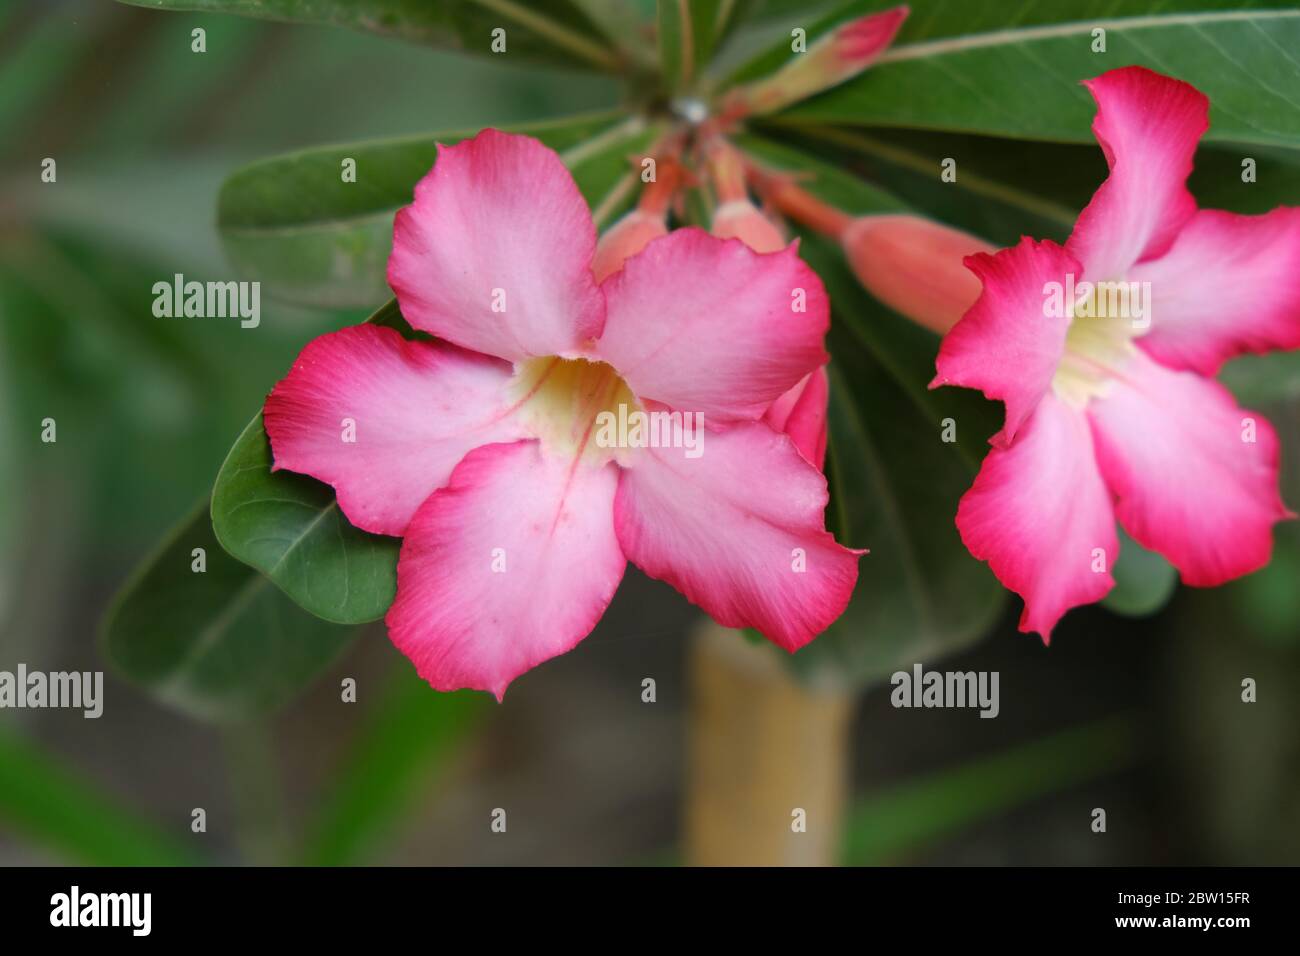 Adenium obesum is a species of flowering plant in the dogbane family, Apocynaceae, that is native to the Sahel regions, south of the Sahara Stock Photo